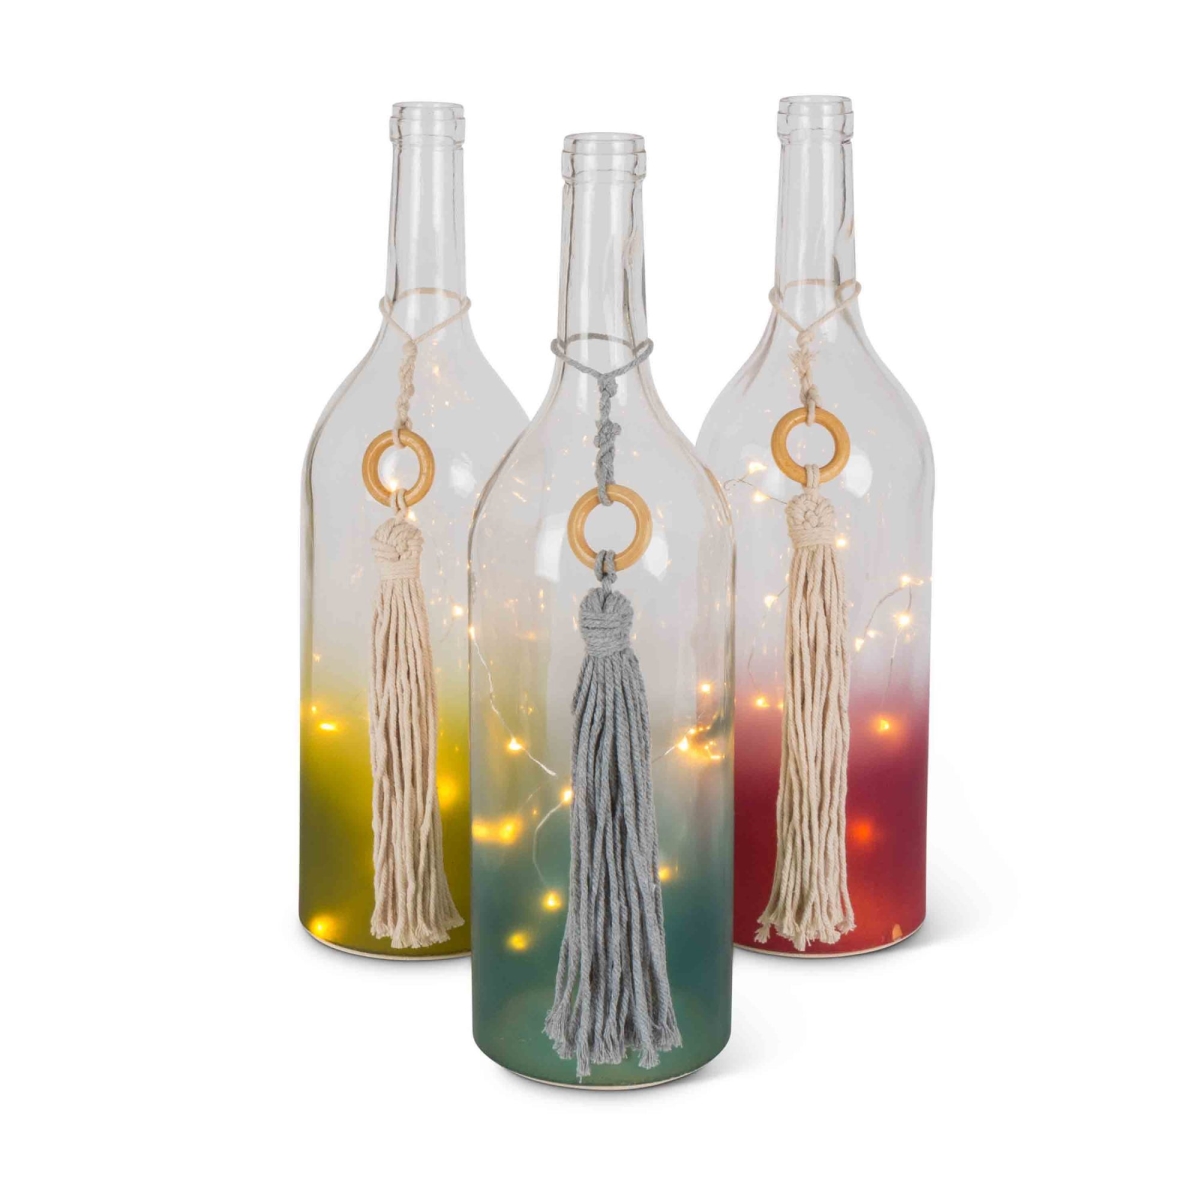 Gerson 94523ec Ombre Frosted Wine Bottles With Cotton Tassels Warm White Lights & Timer - Multi Color - Set Of 3